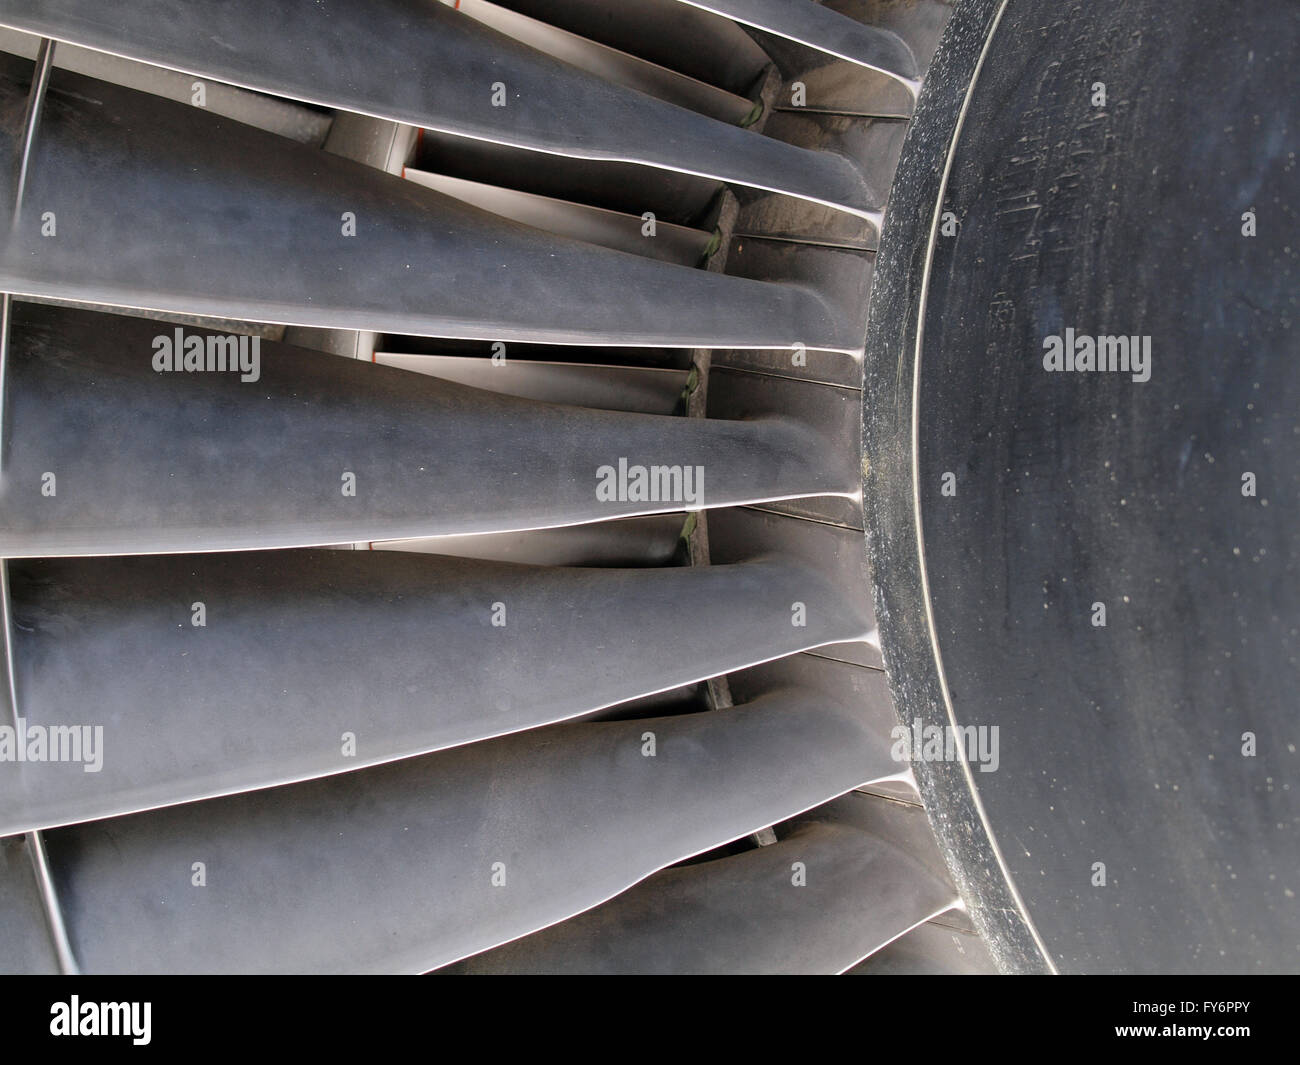 Close up of turbine and fan blades of a jet engine with signs of wear. Stock Photo